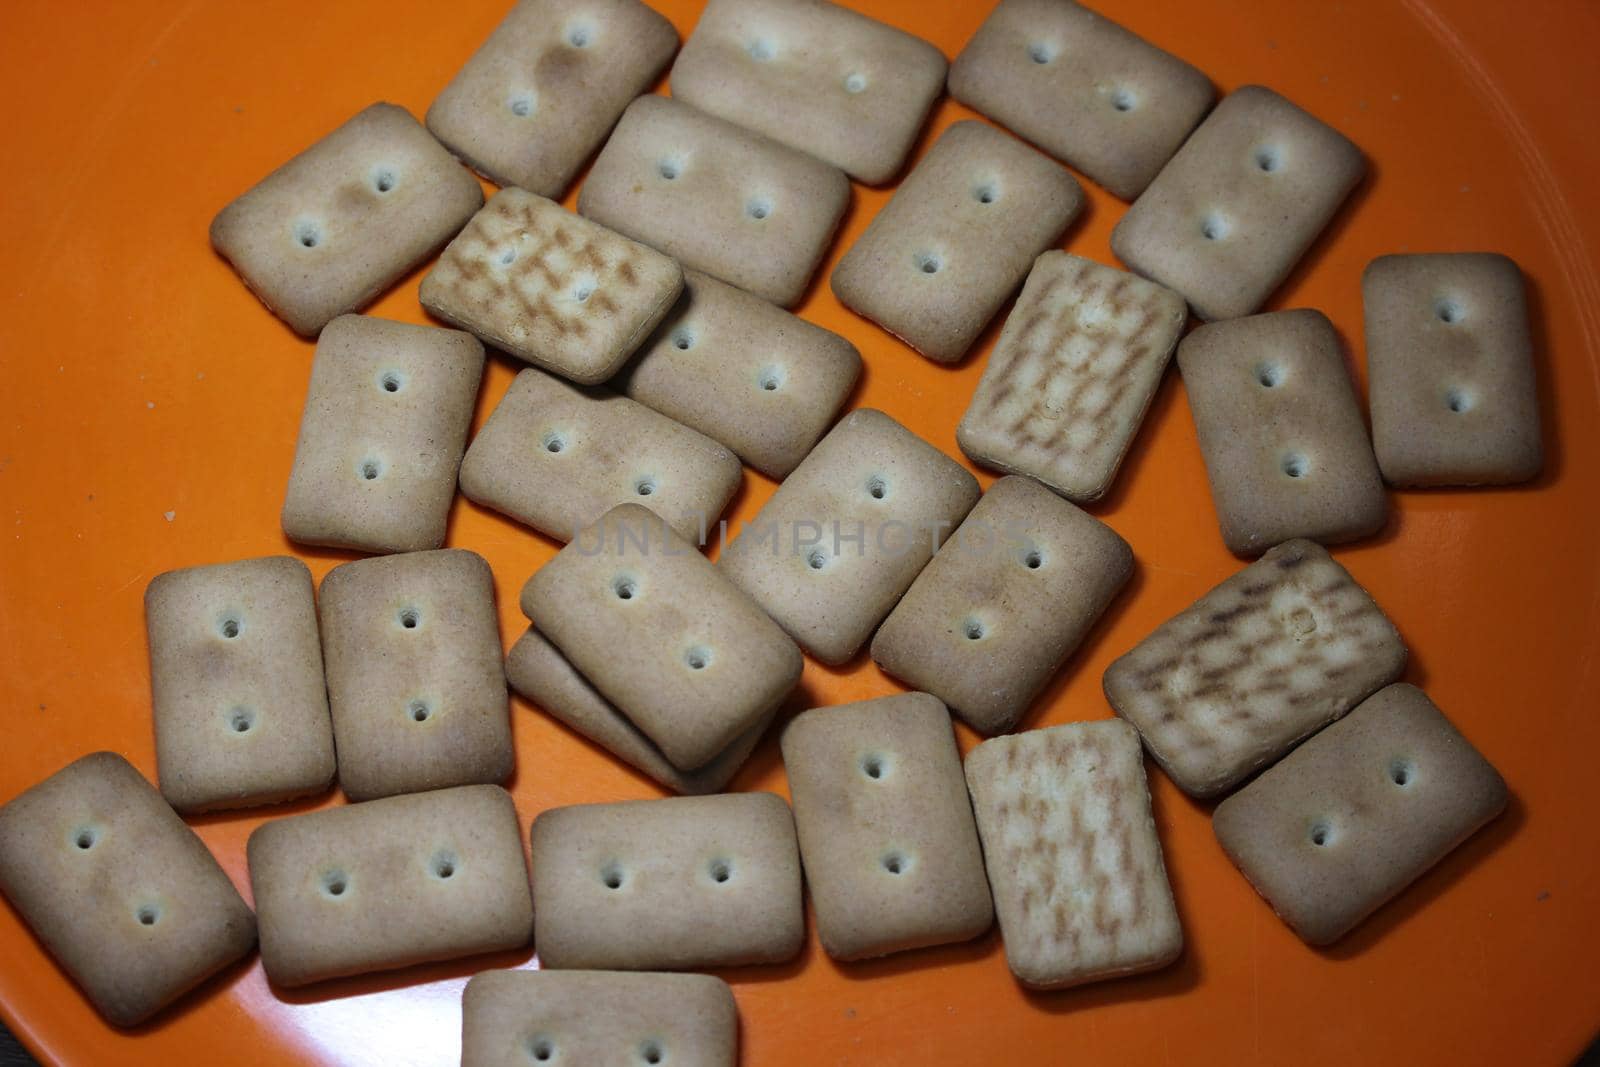 Many rectangular biscuits with small pores in red plate by Photochowk